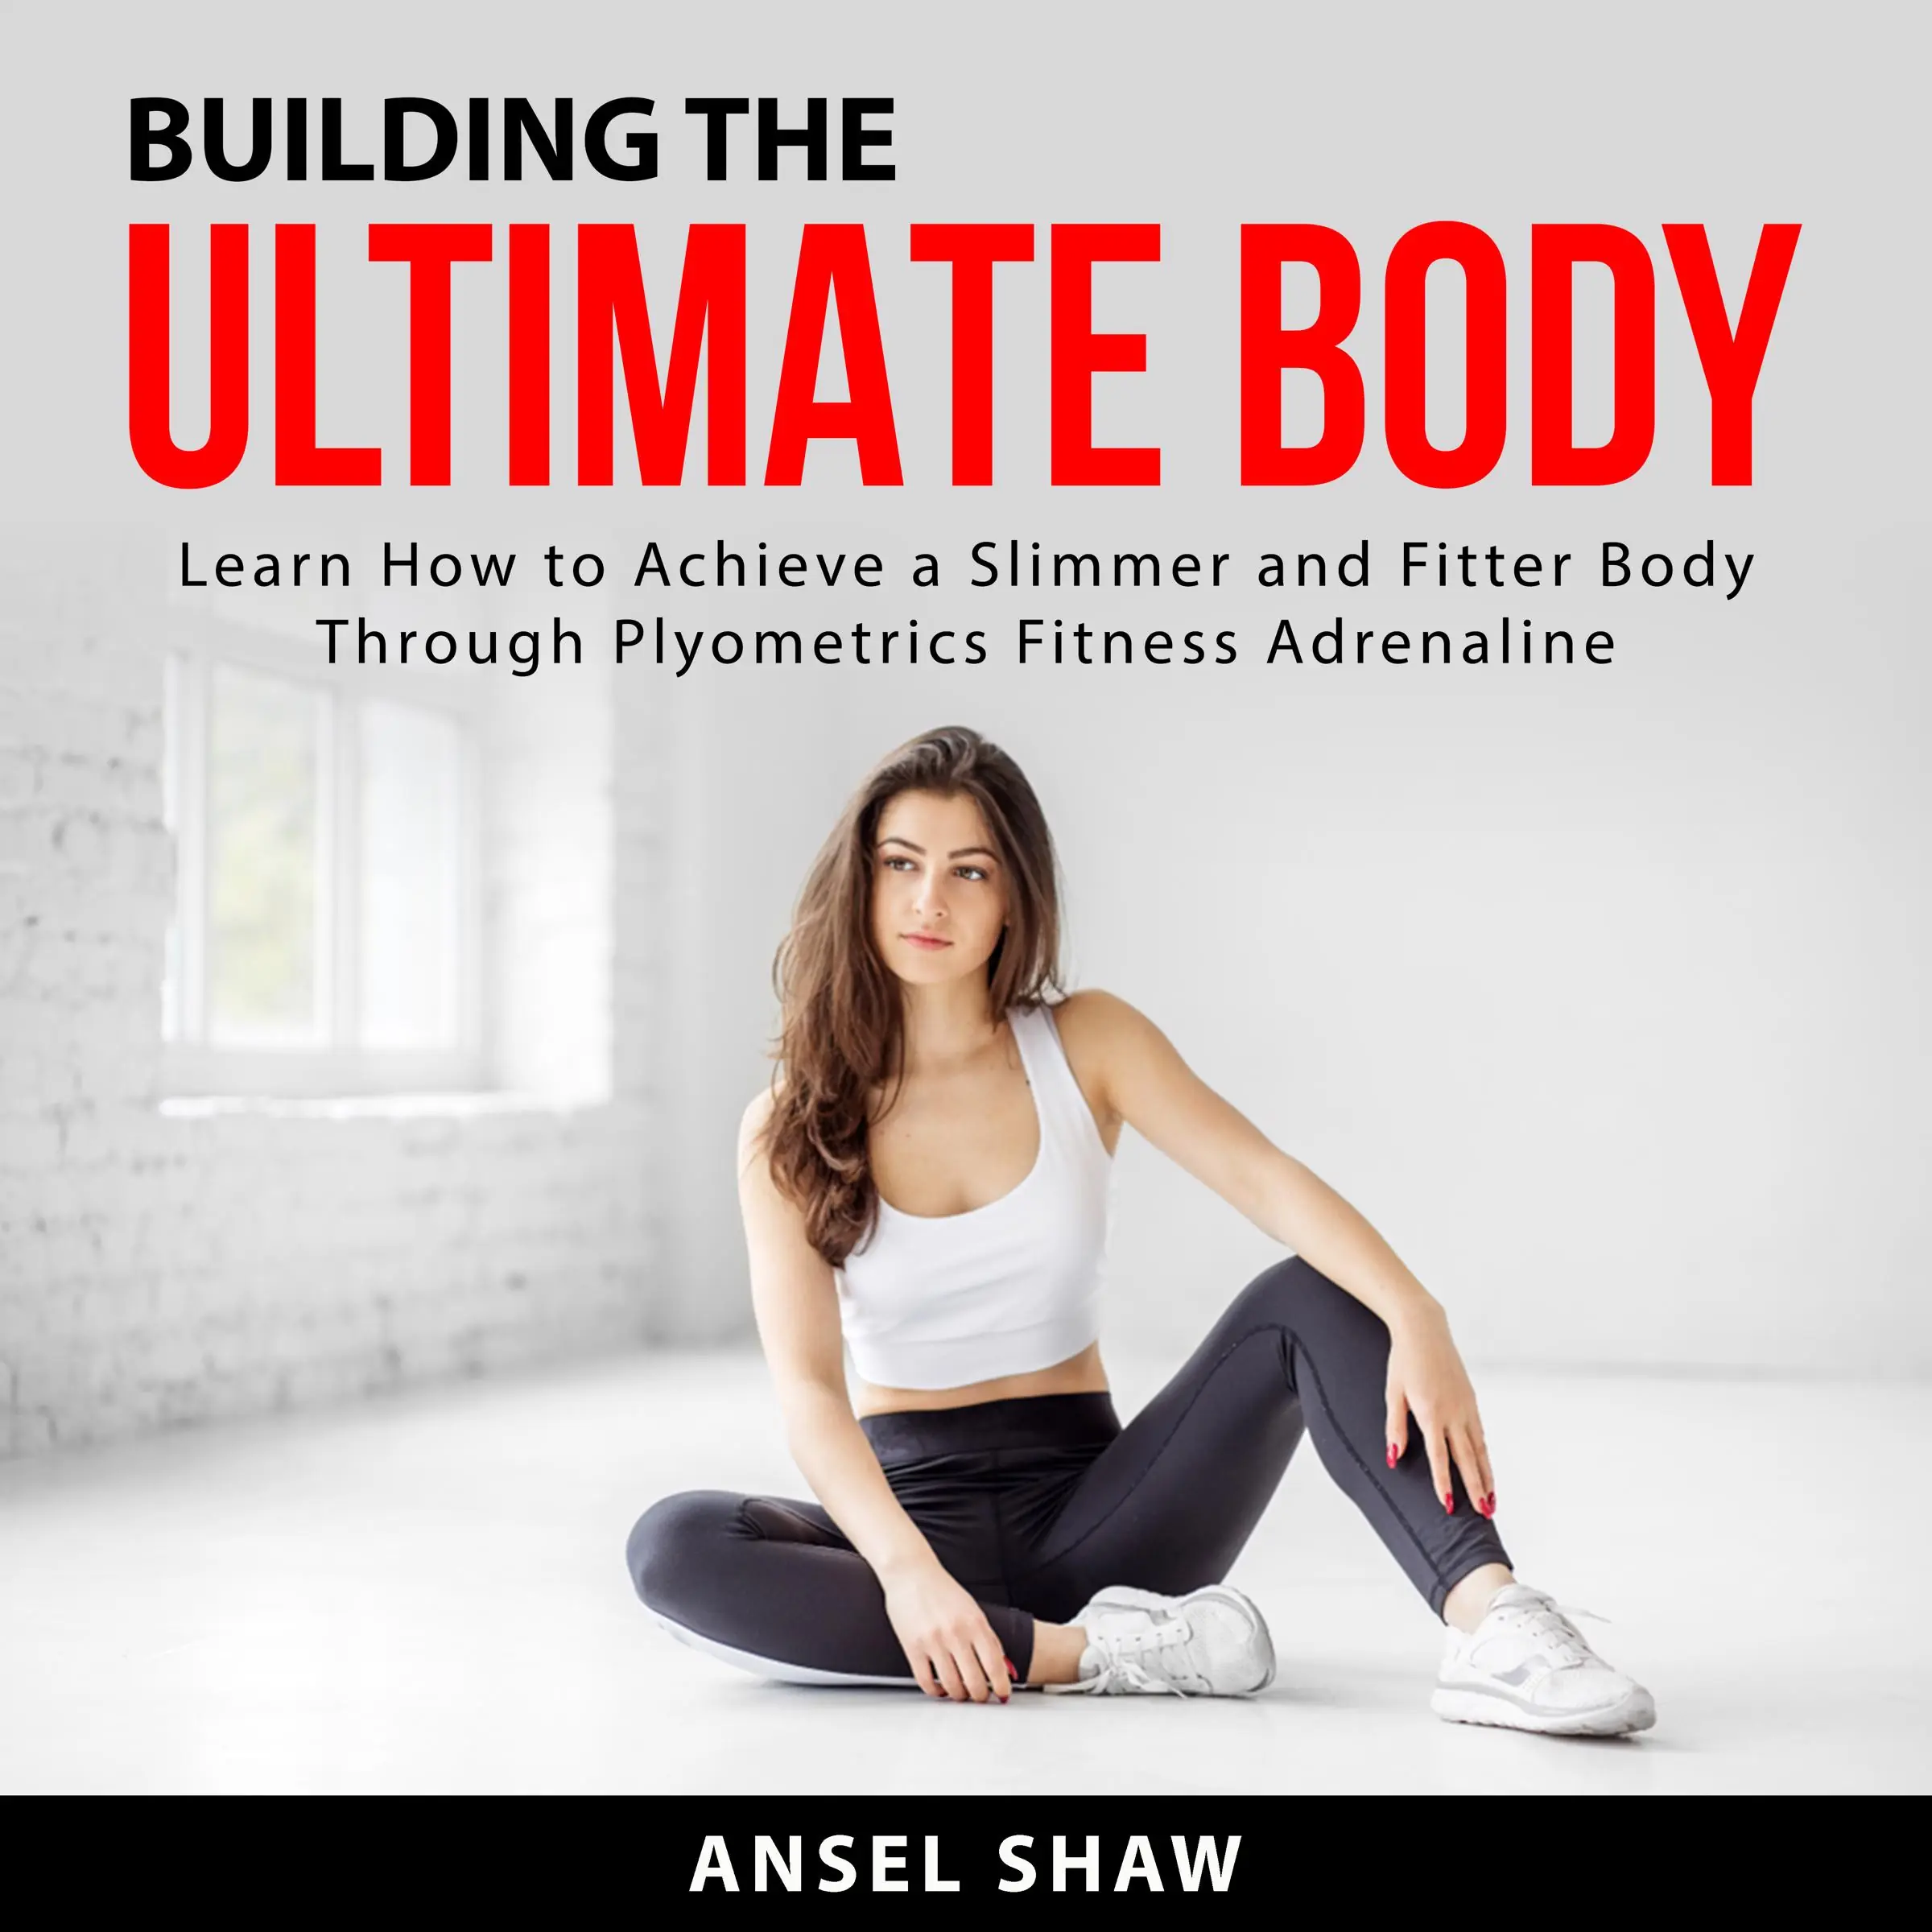 Building the Ultimate Body: Learn How to Achieve a Slimmer and Fitter Body Through Plyometrics Fitness Adrenaline Audiobook by Ansel Shaw